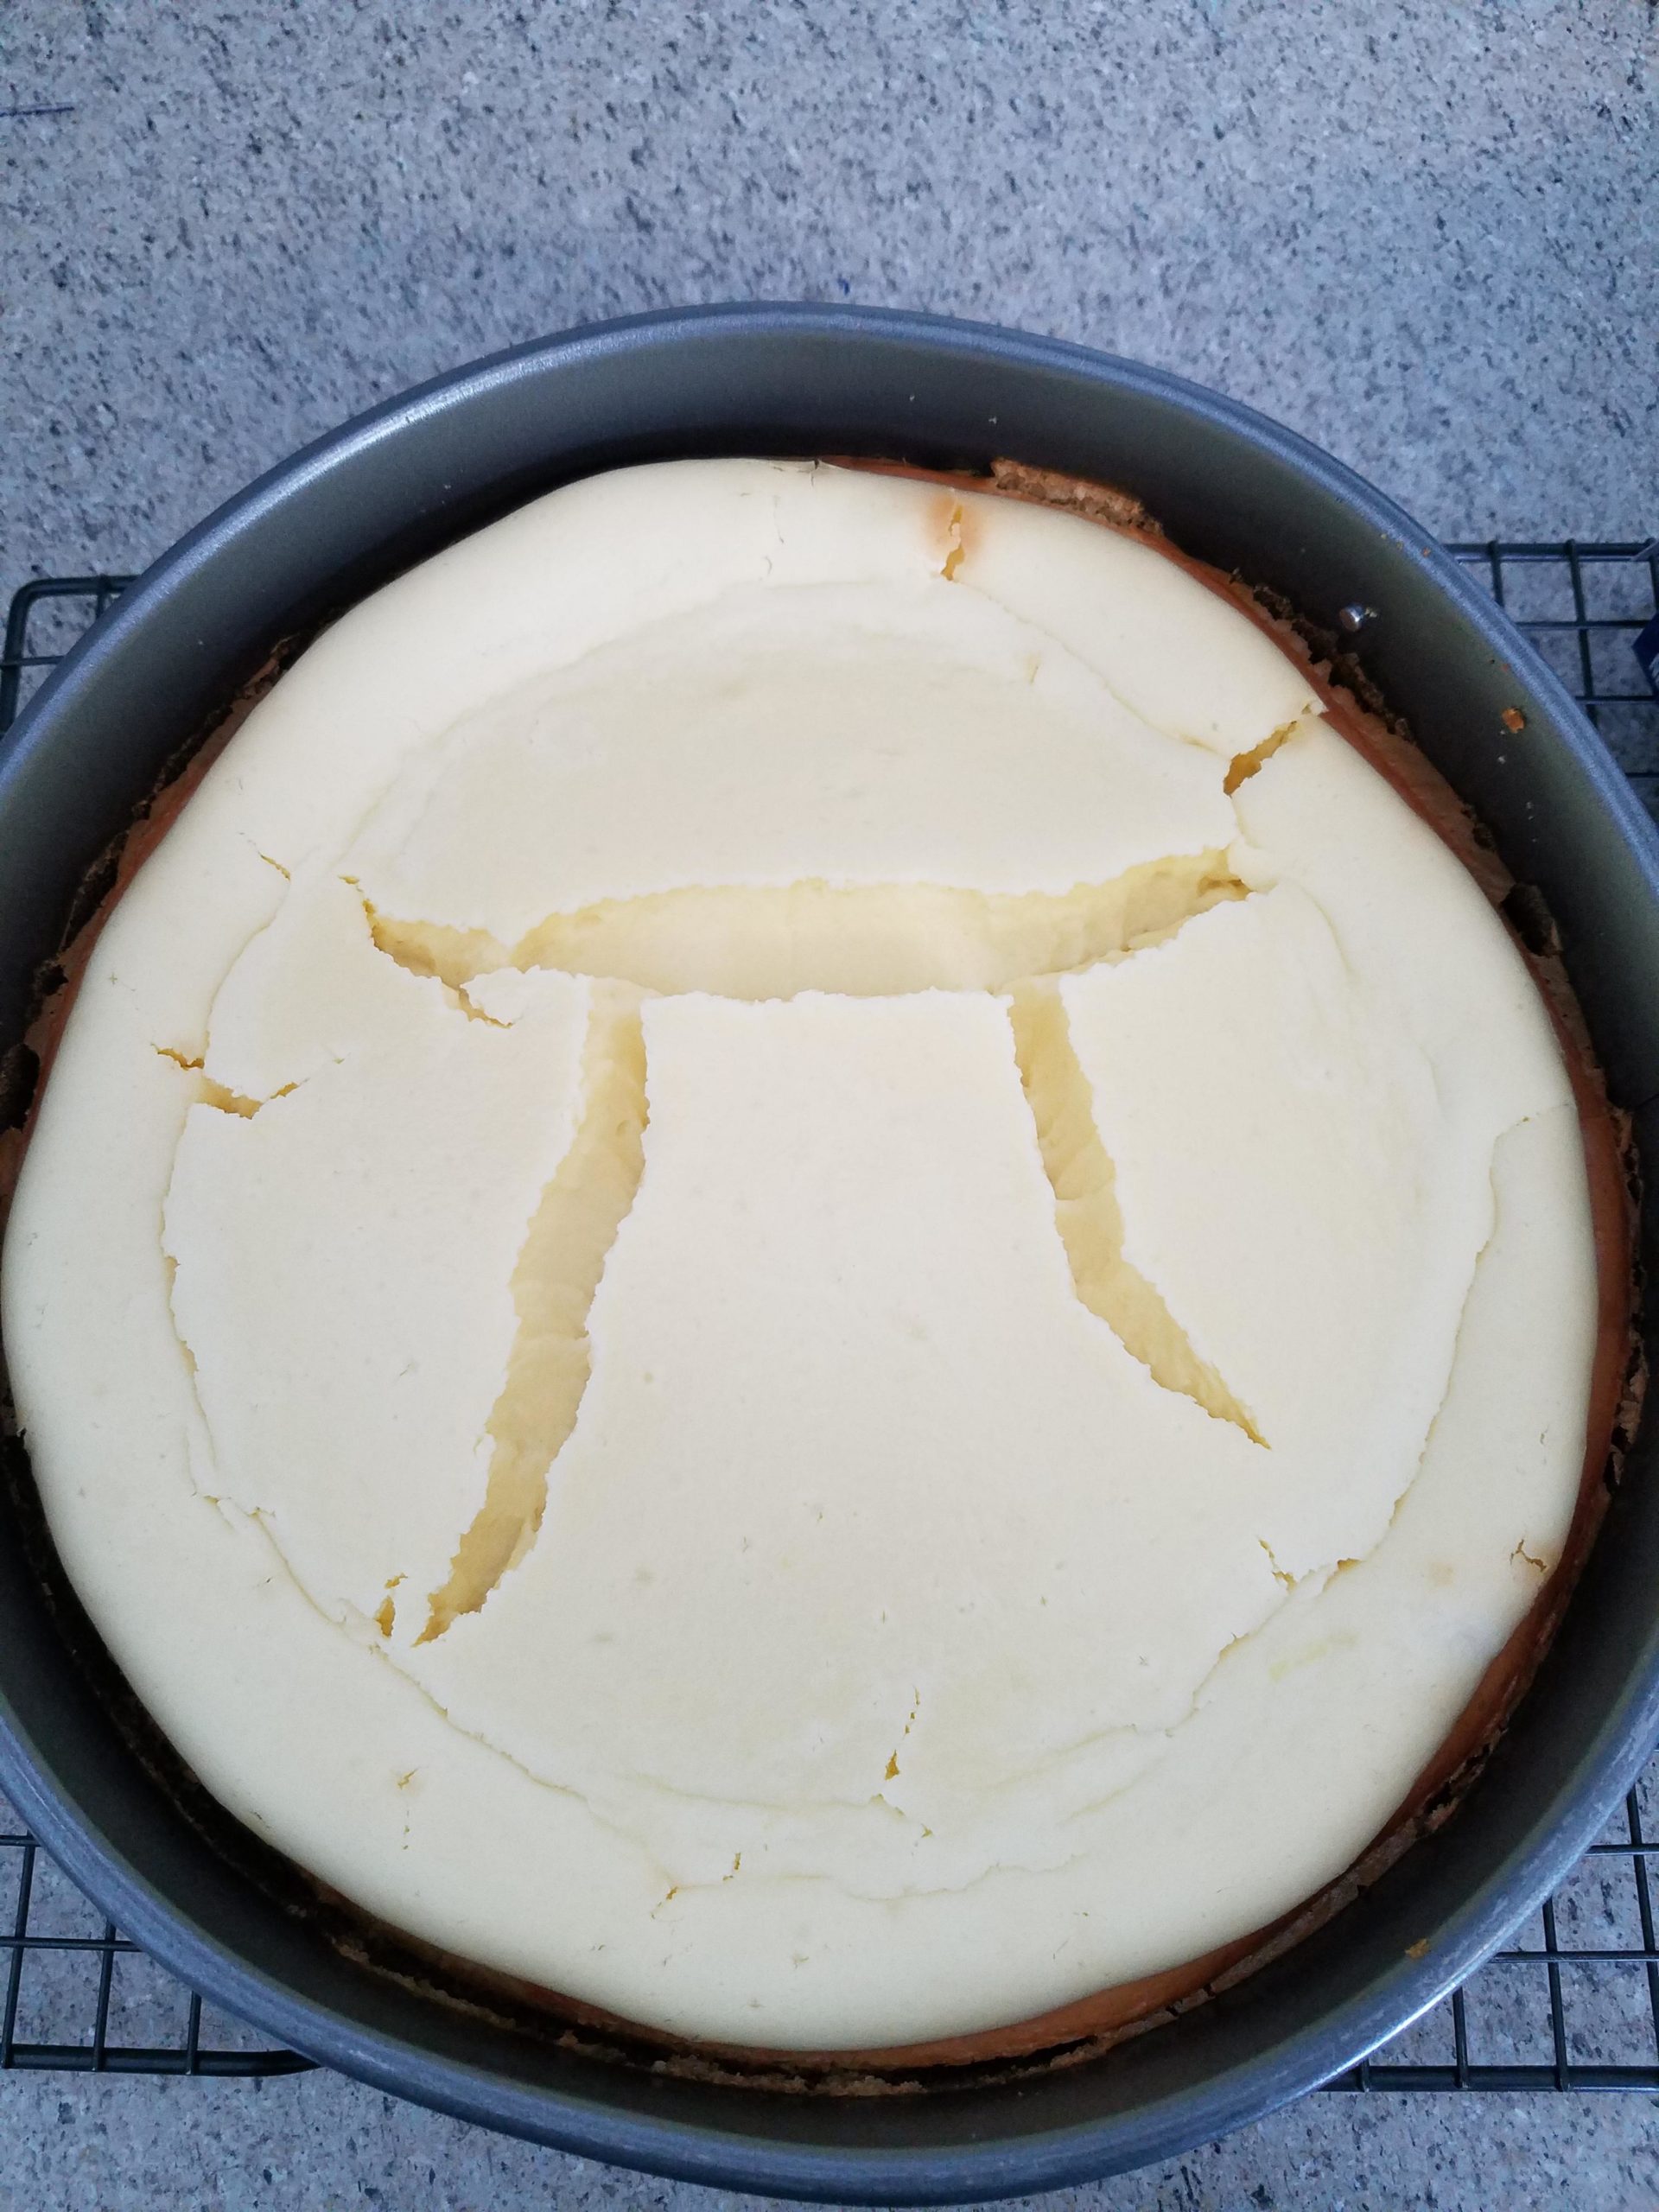 My+cheesecake+cracked+into+a+Pi.